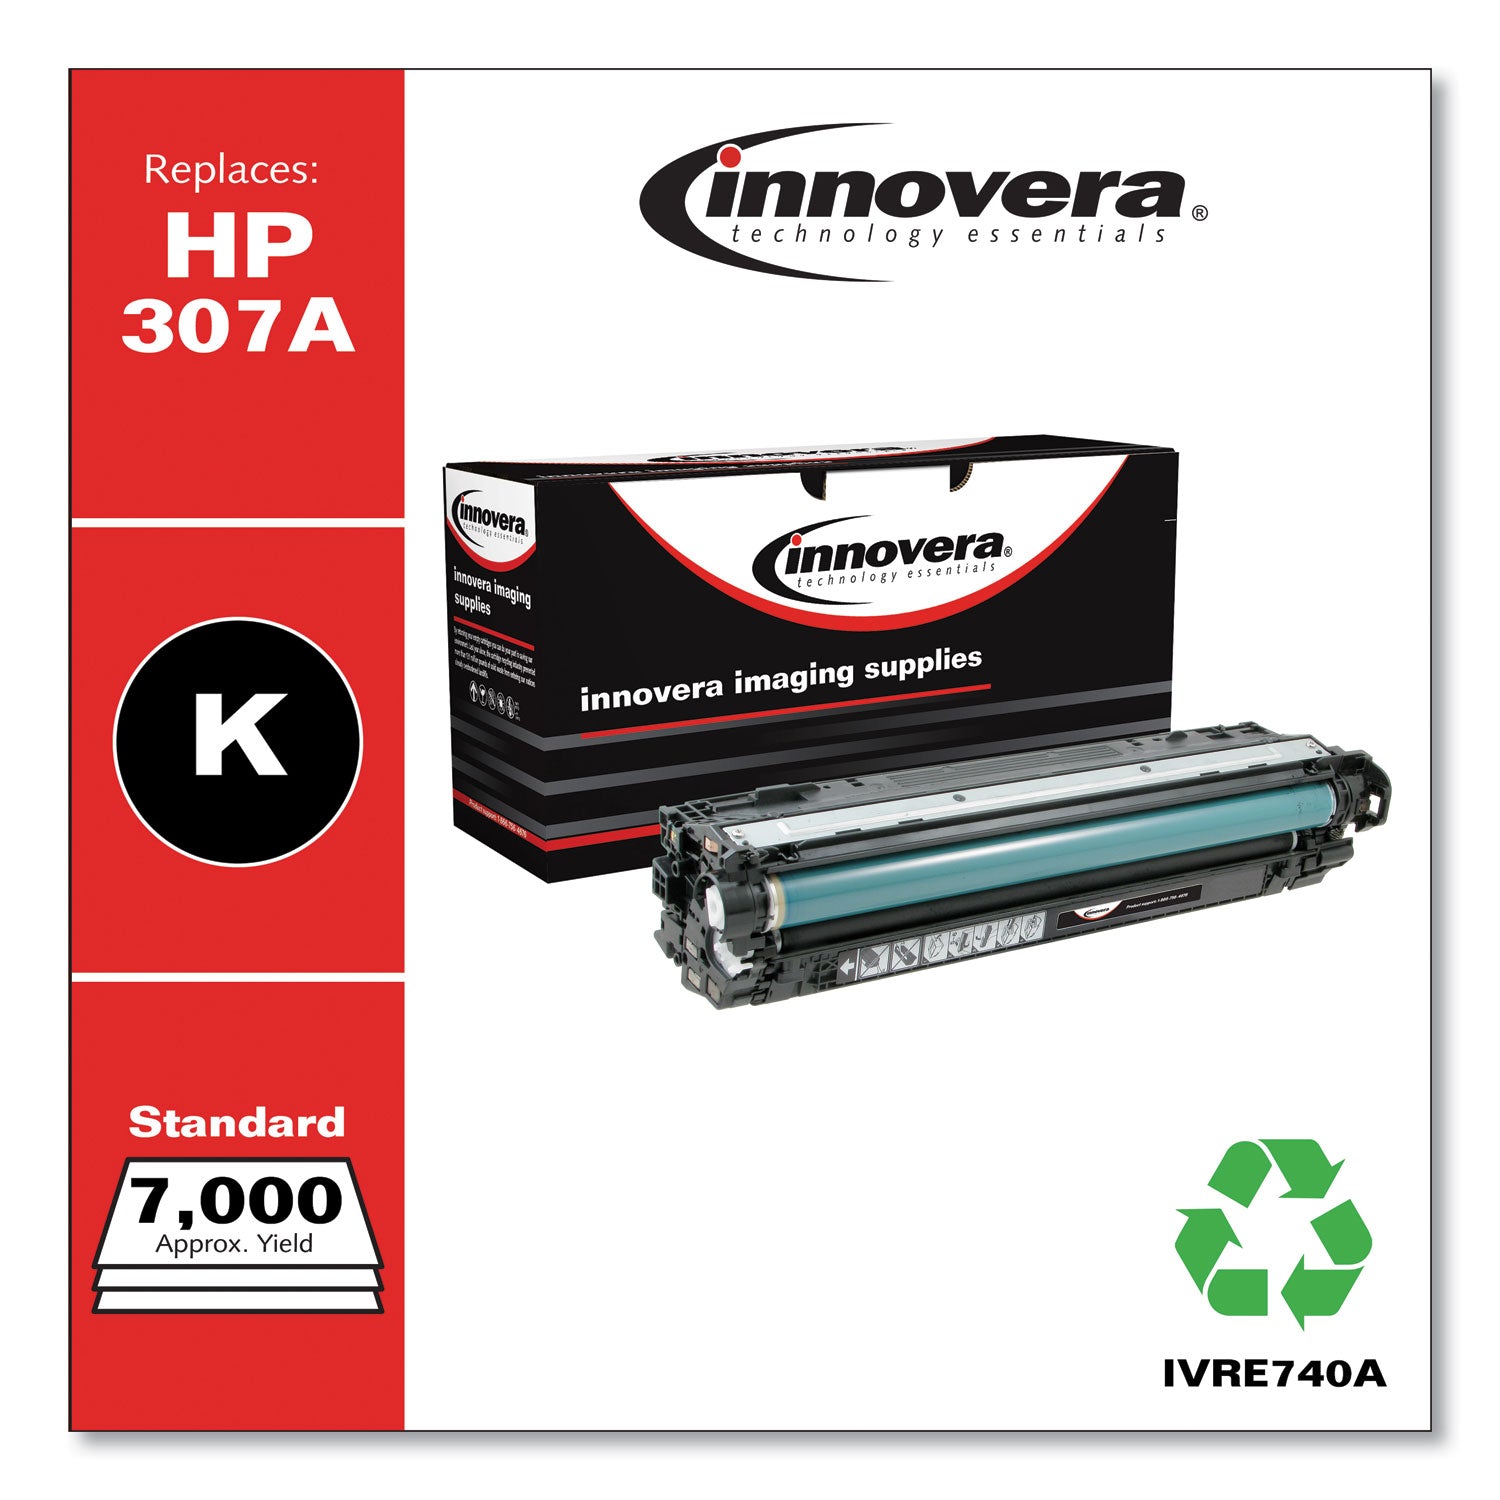 Remanufactured Black Toner, Replacement for 307A (CE740A), 7,000 Page-Yield - 